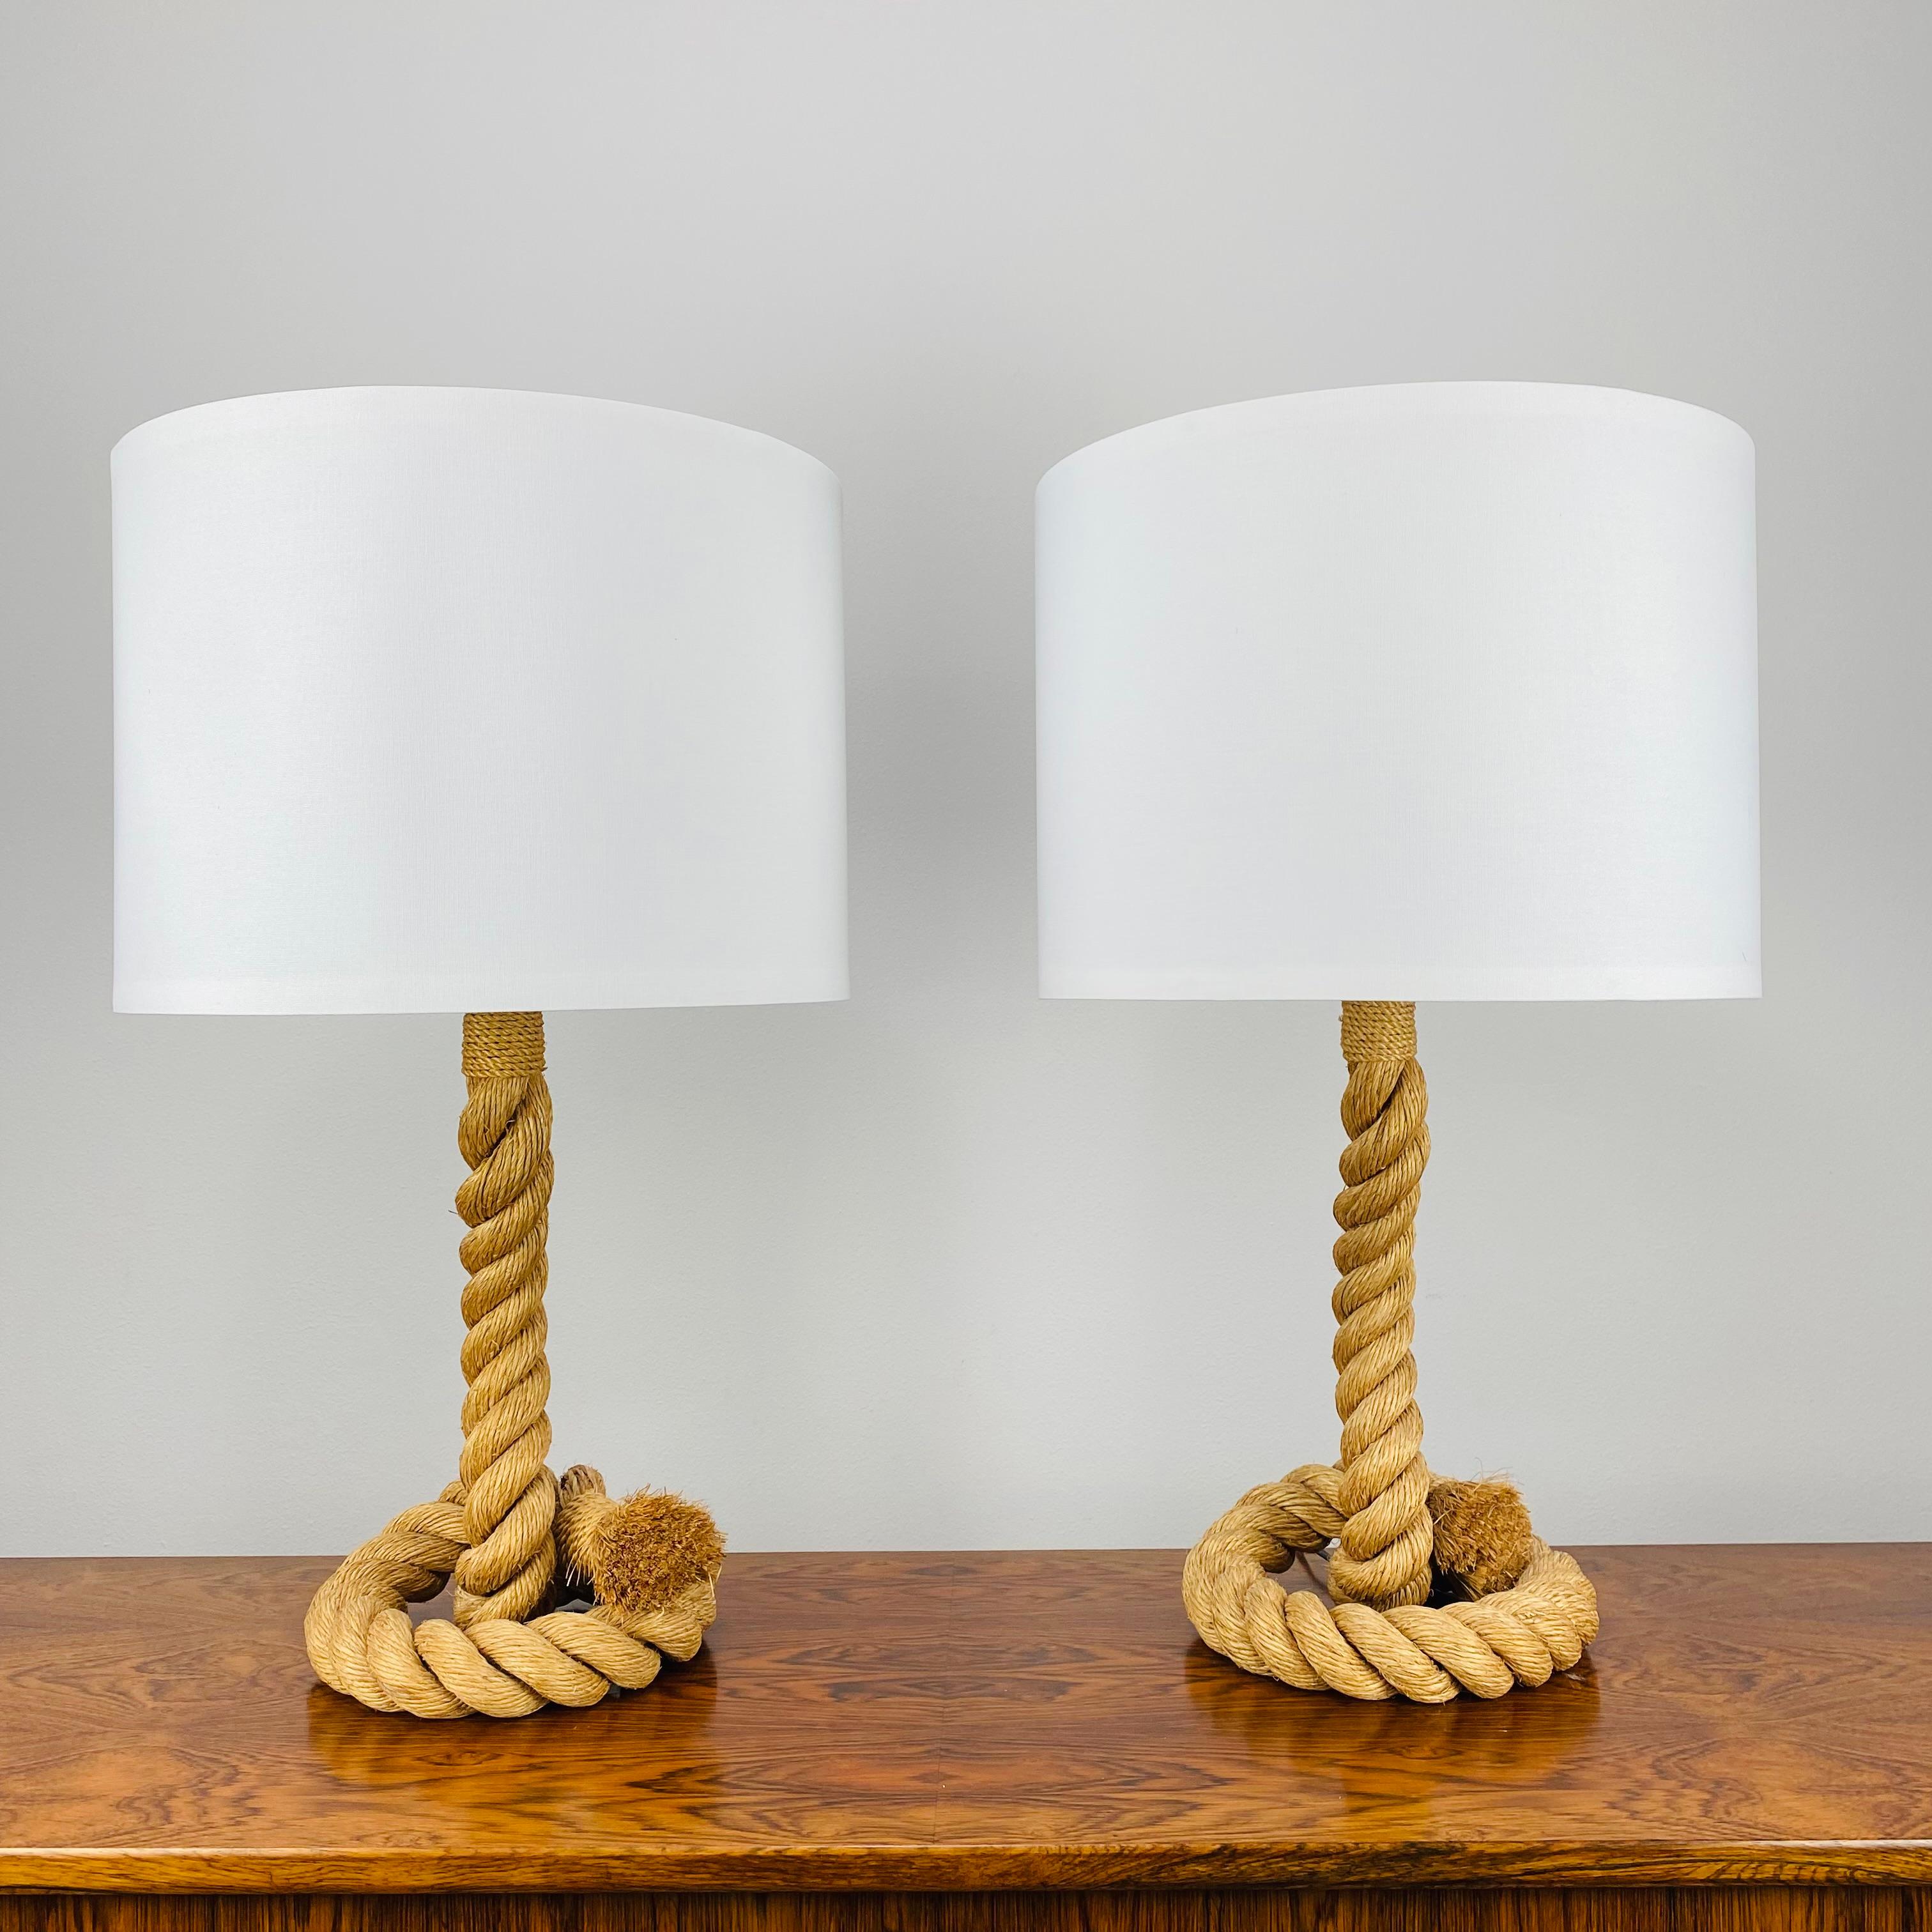 Pair of 1970's cord lamps in the style of Adrien Audoux and Frida Minet. 
New lampshades, french electrification. 

Measurements : total height 71,5 cm, total width 42 cm, height without lampshades 47 cm, width without lampshades 25 cm.